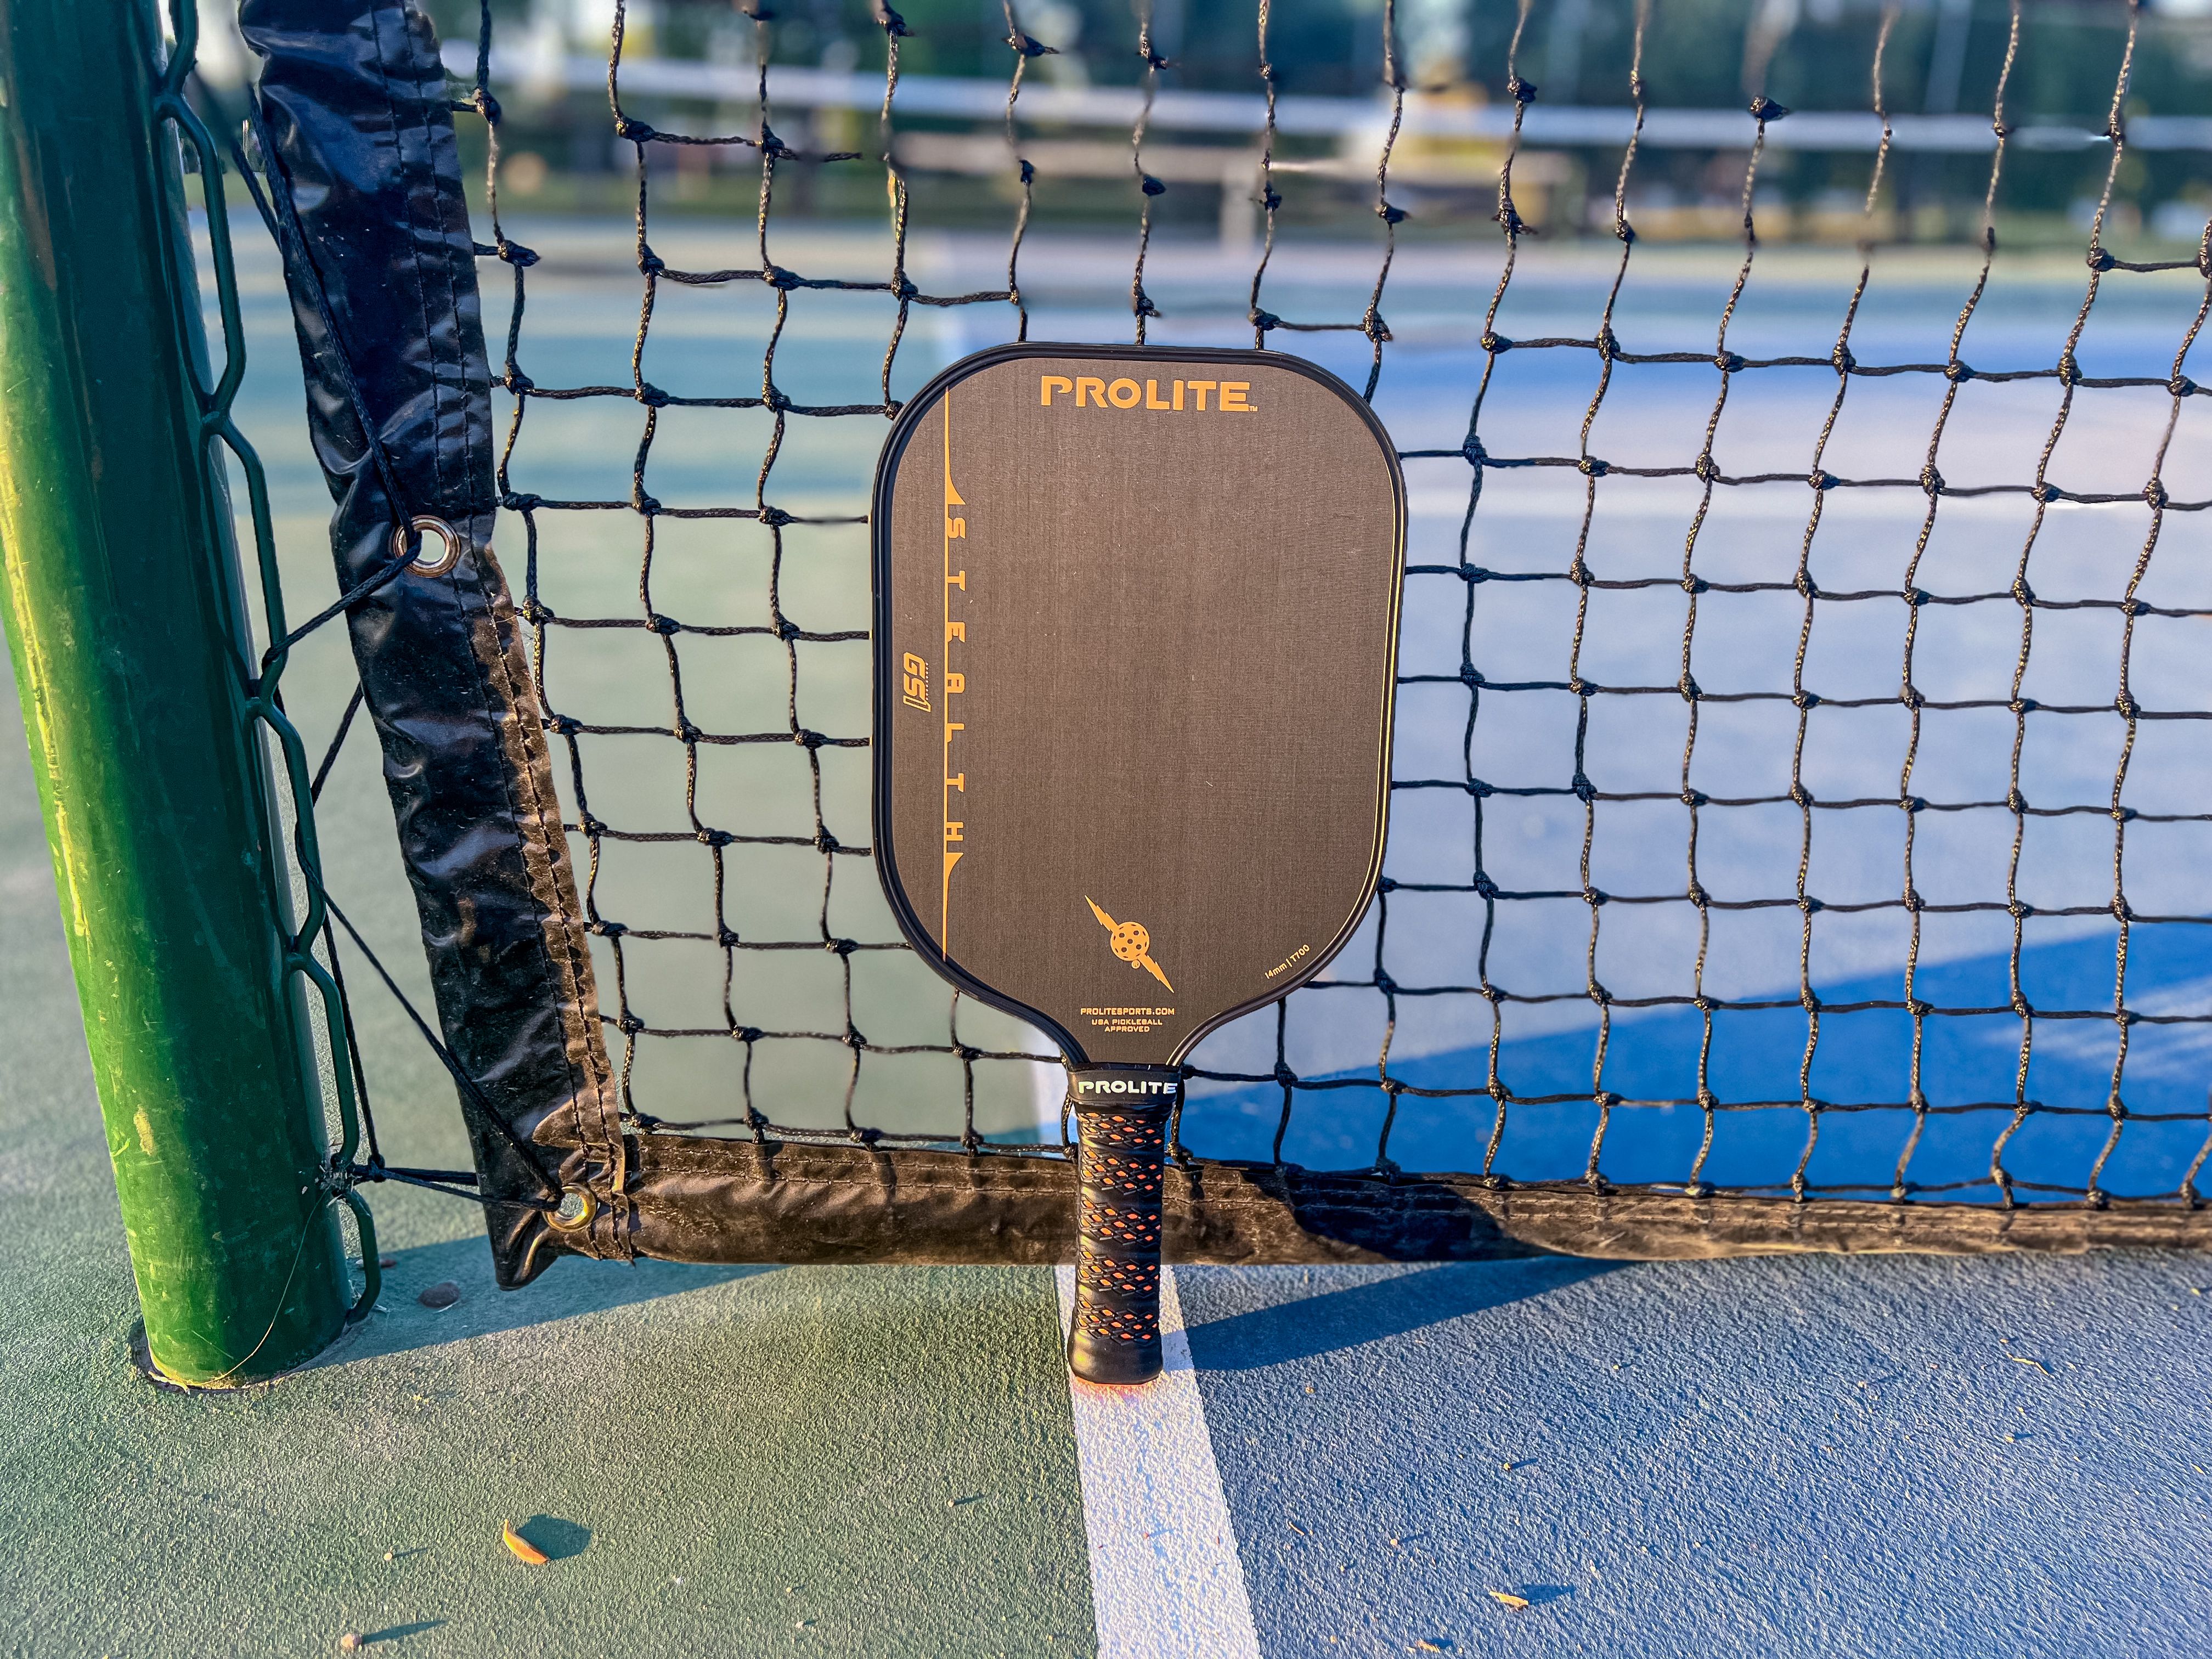 The PROLITE Stealth GS1 pickleball paddle resting against a net